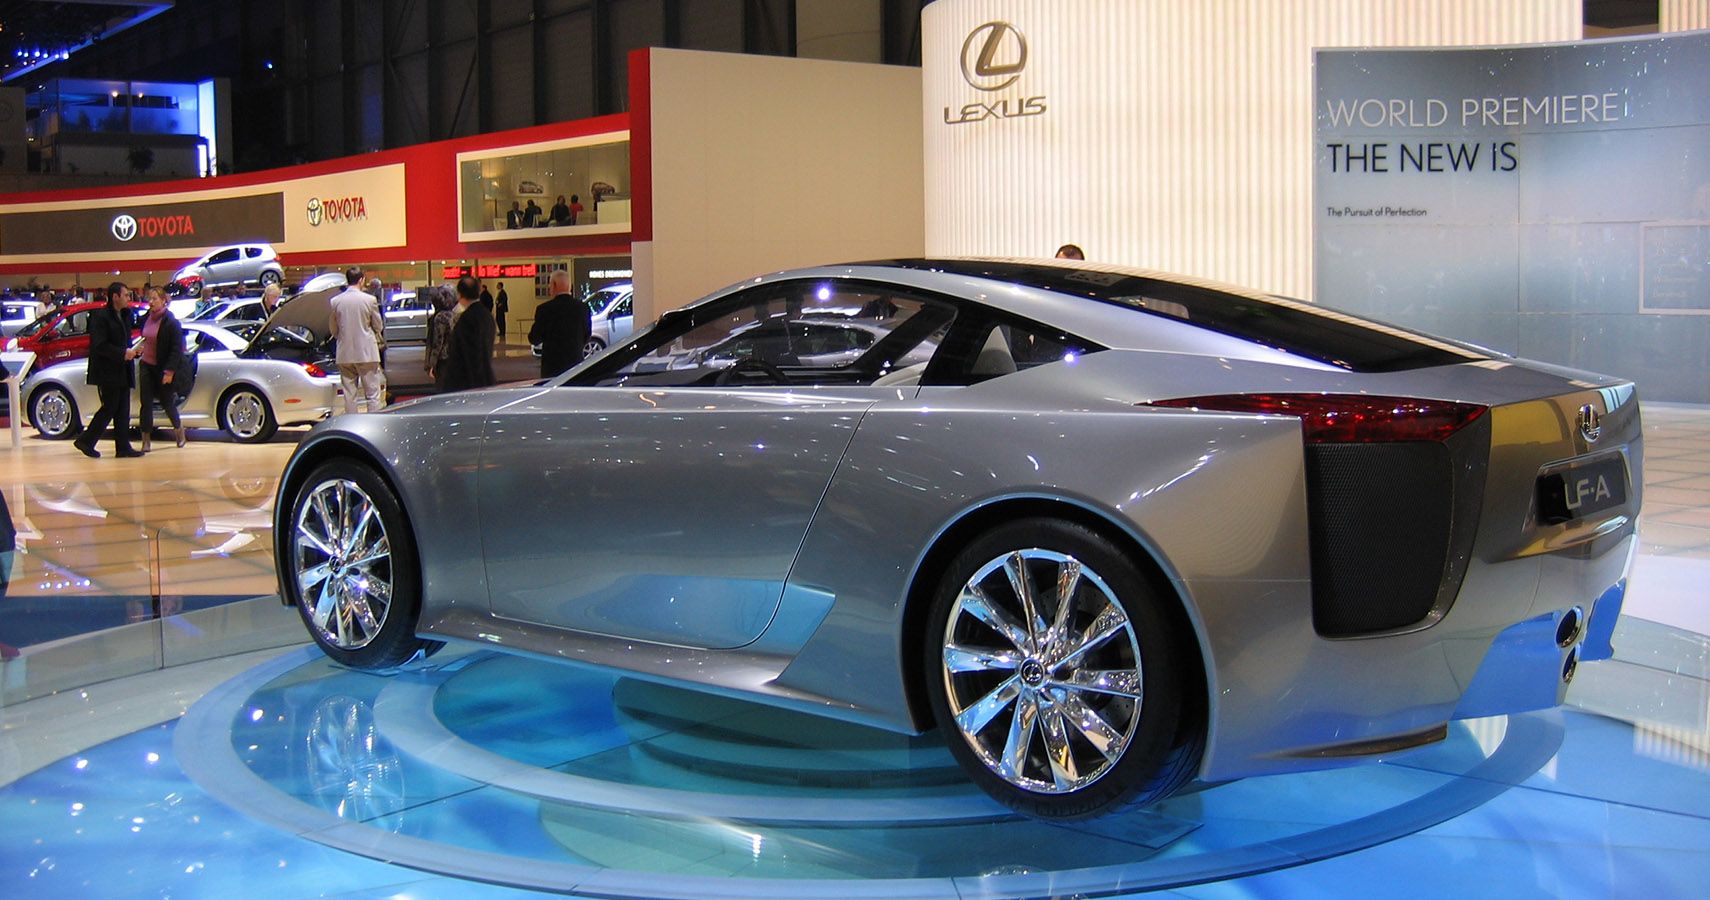 2005 Lexus LF-A Concept: Awesome Car But A Loss